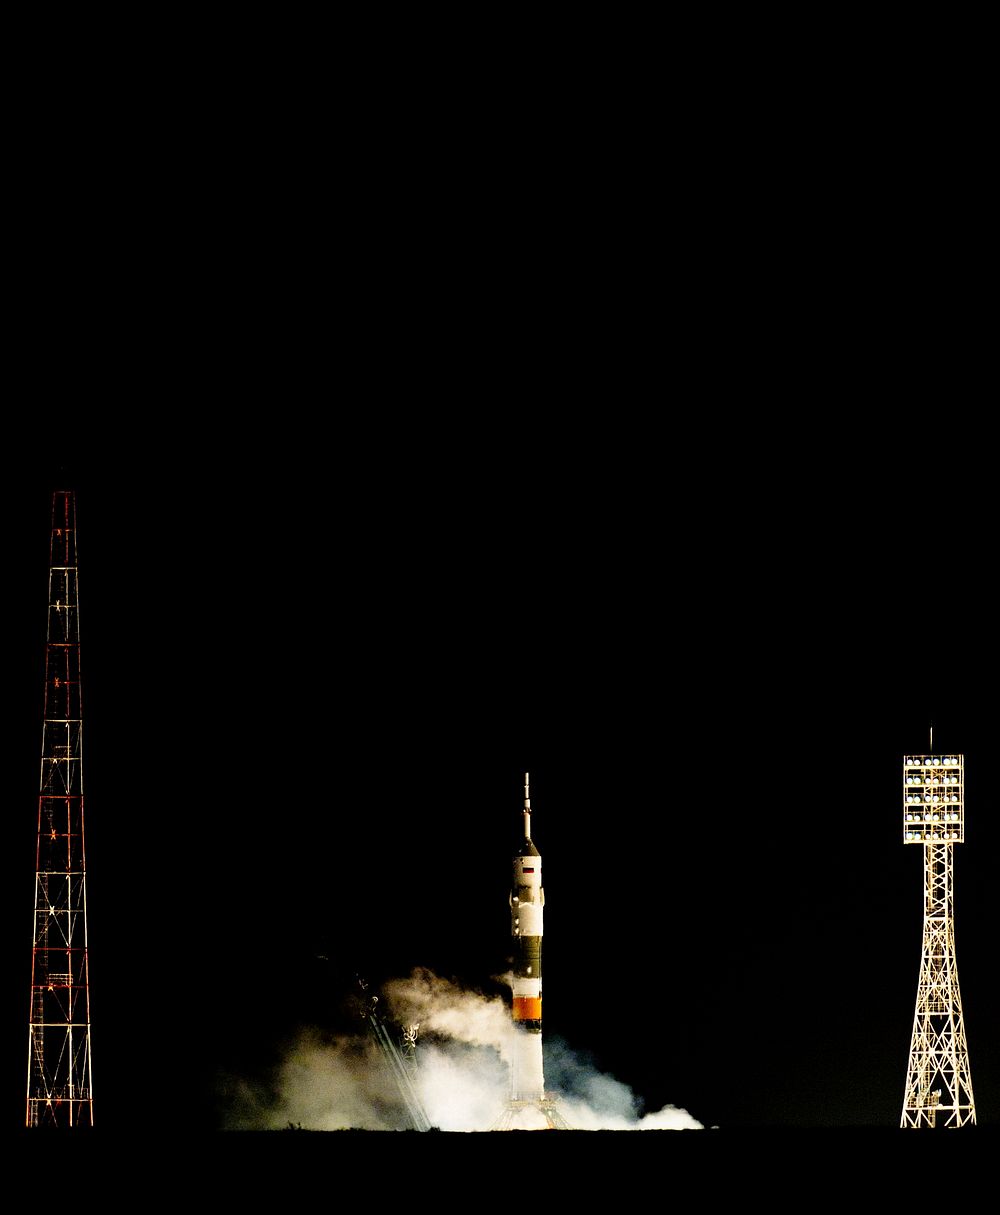 The Soyuz TMA-03M rocket launches from the Baikonur Cosmodrome in Kazakhstan on Dec. 21, 2011. Original from NASA. Digitally…